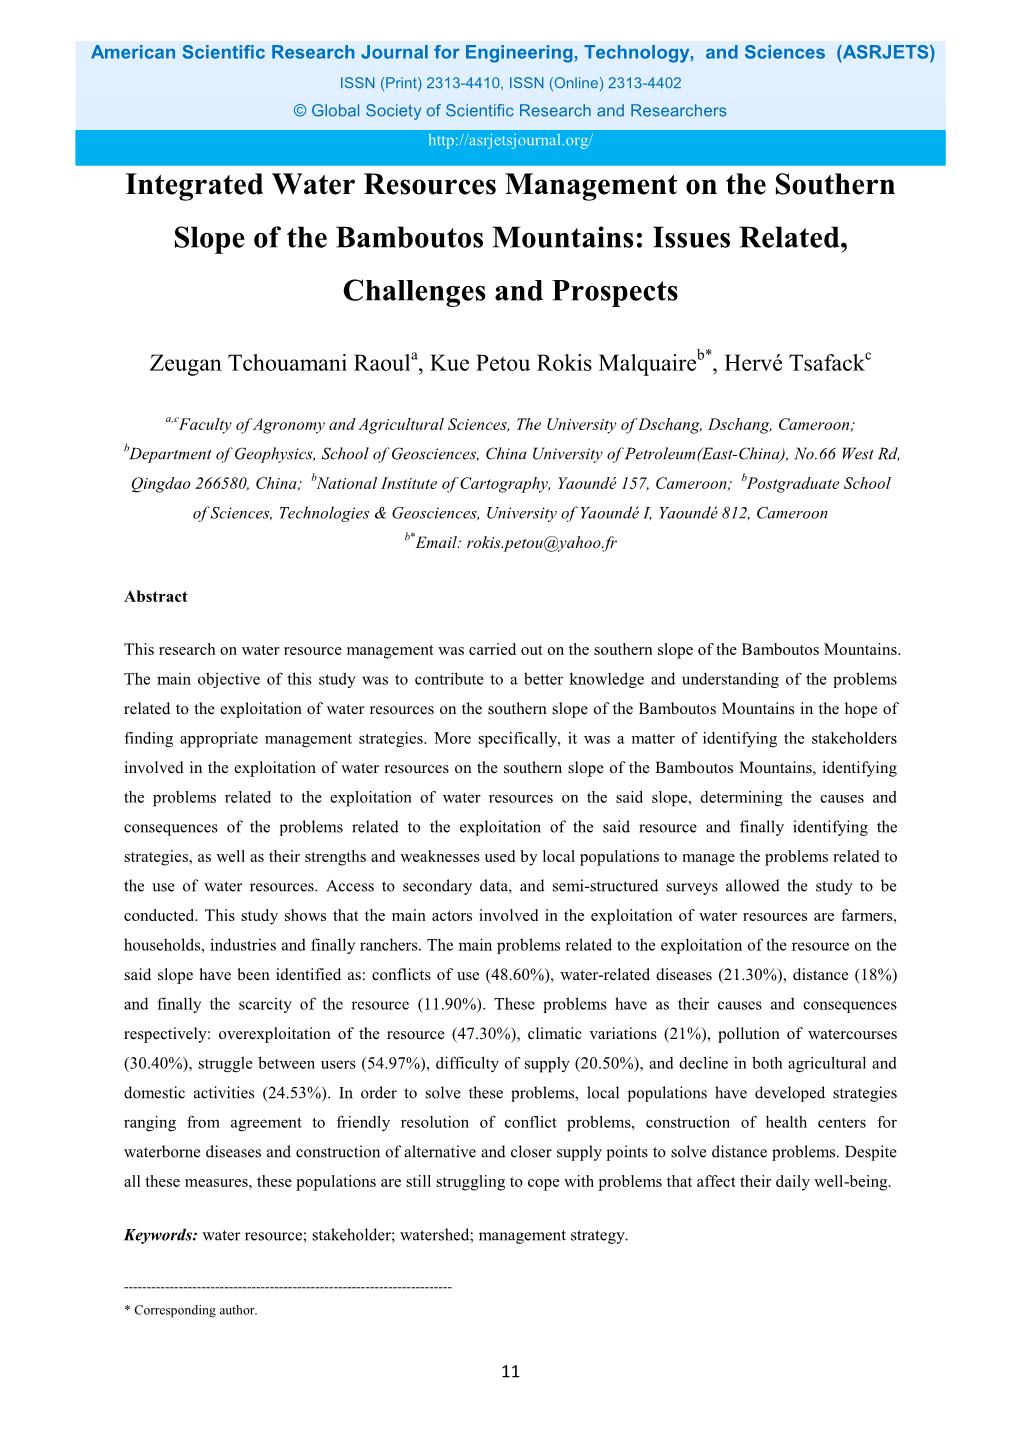 Integrated Water Resources Management on the Southern Slope of the Bamboutos Mountains: Issues Related, Challenges and Prospects